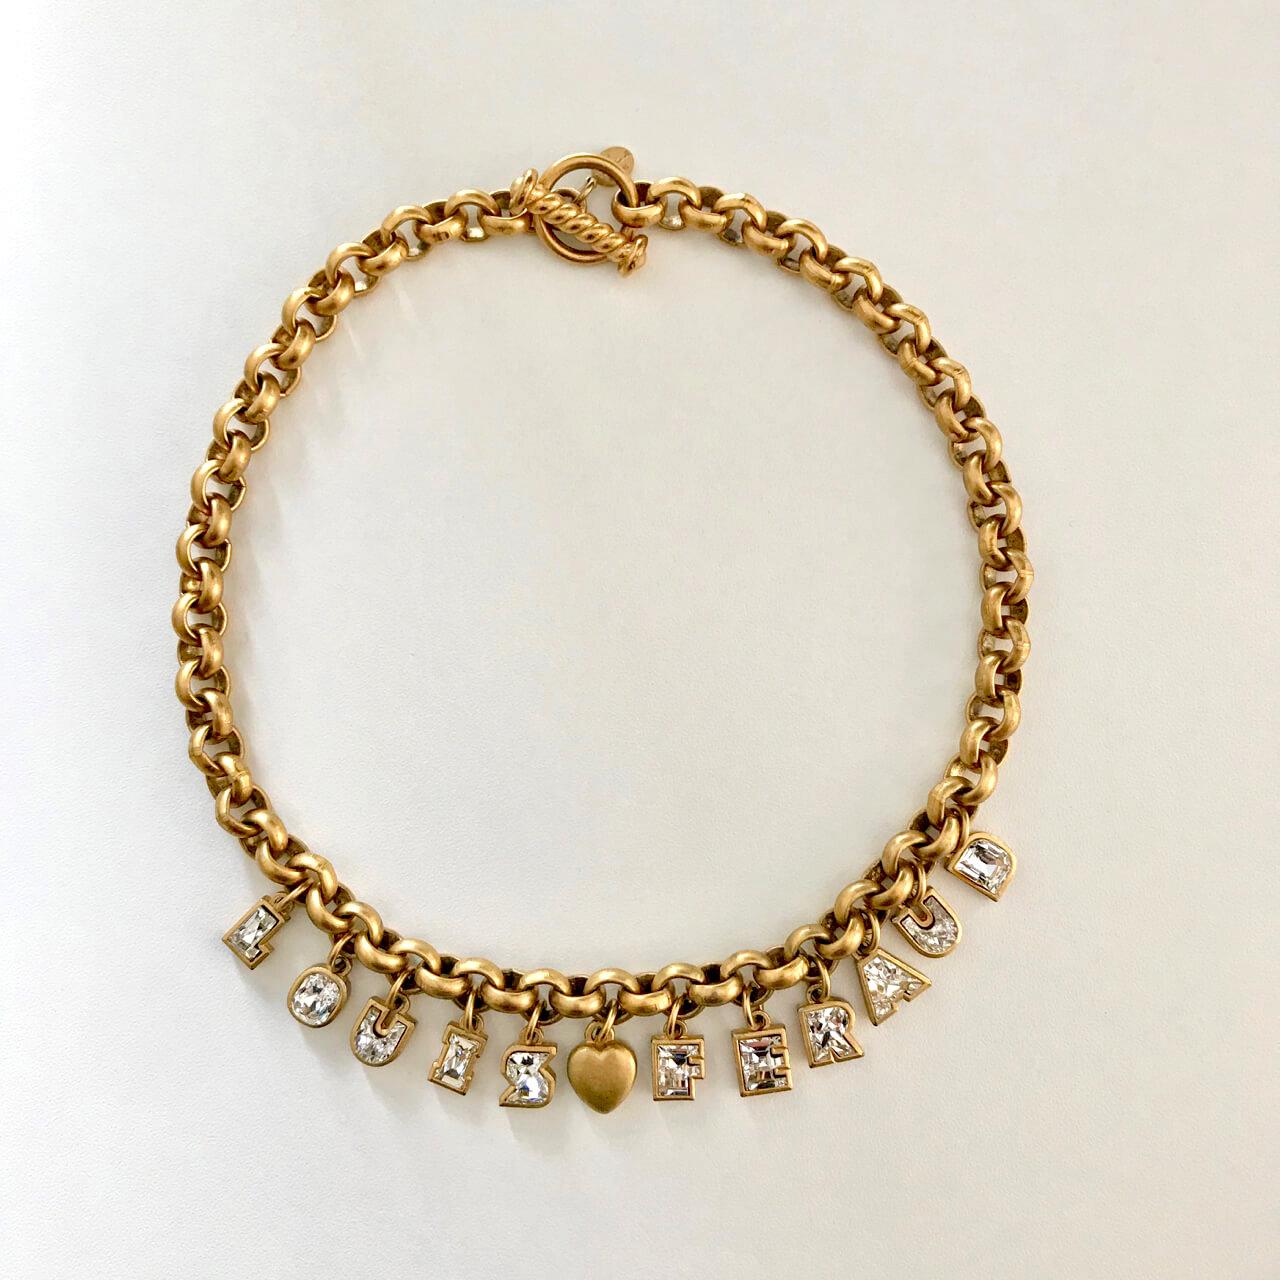 A rare Louis Féraud gold tone statement necklace and bracelet set from the 1980s featuring each a massive gold tone chain, clear rhinestone filled 